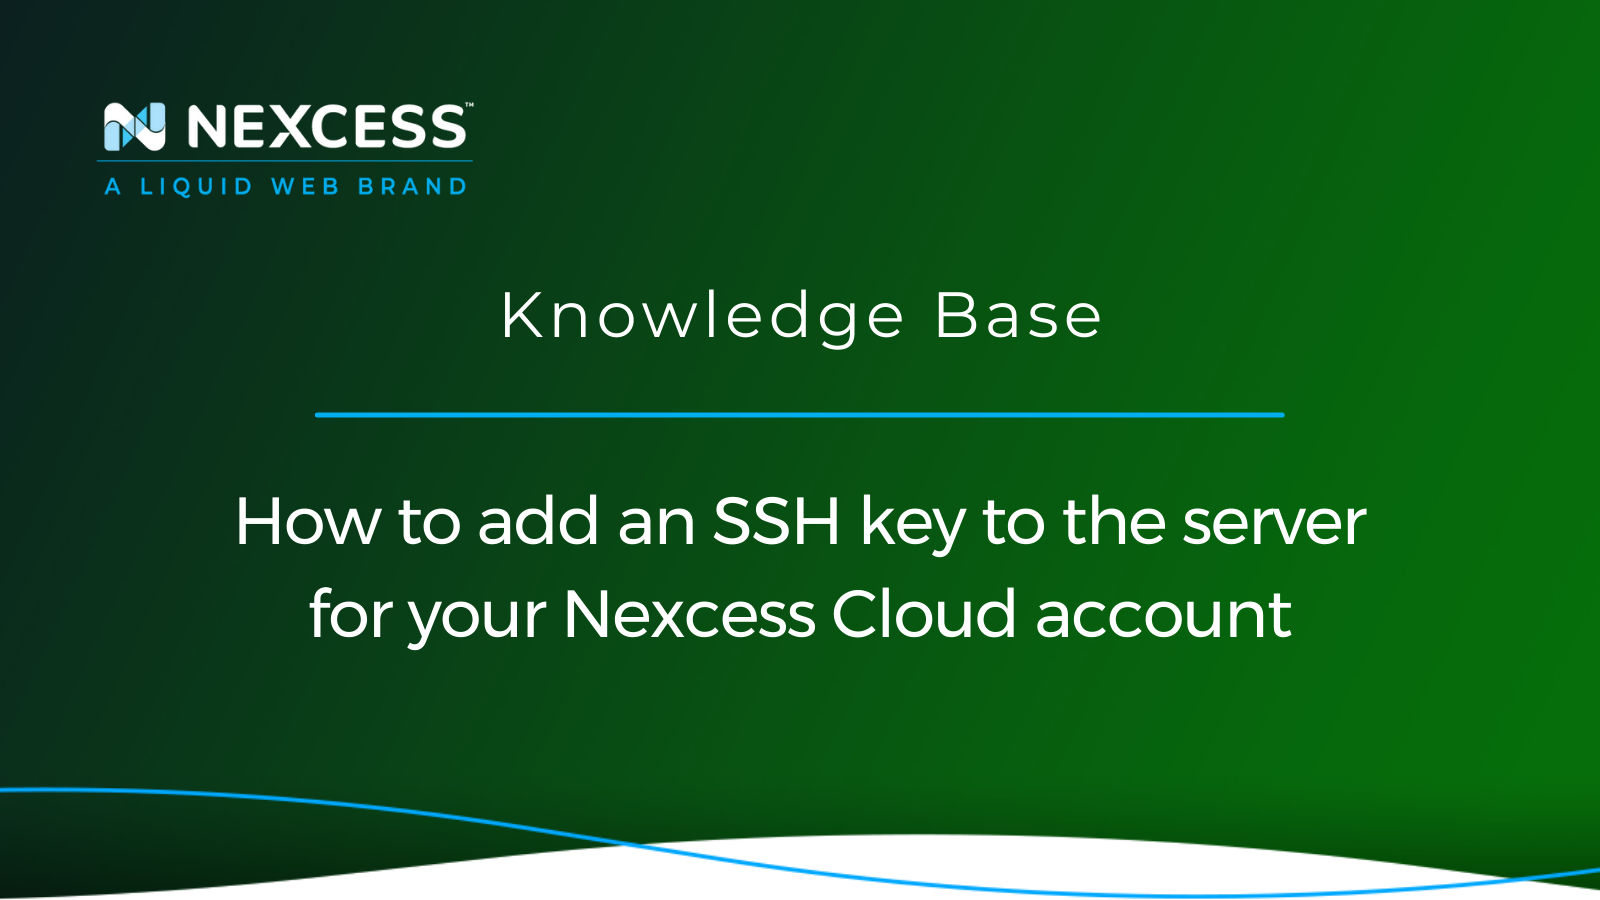 How to add an SSH key to the server for your Nexcess Cloud account